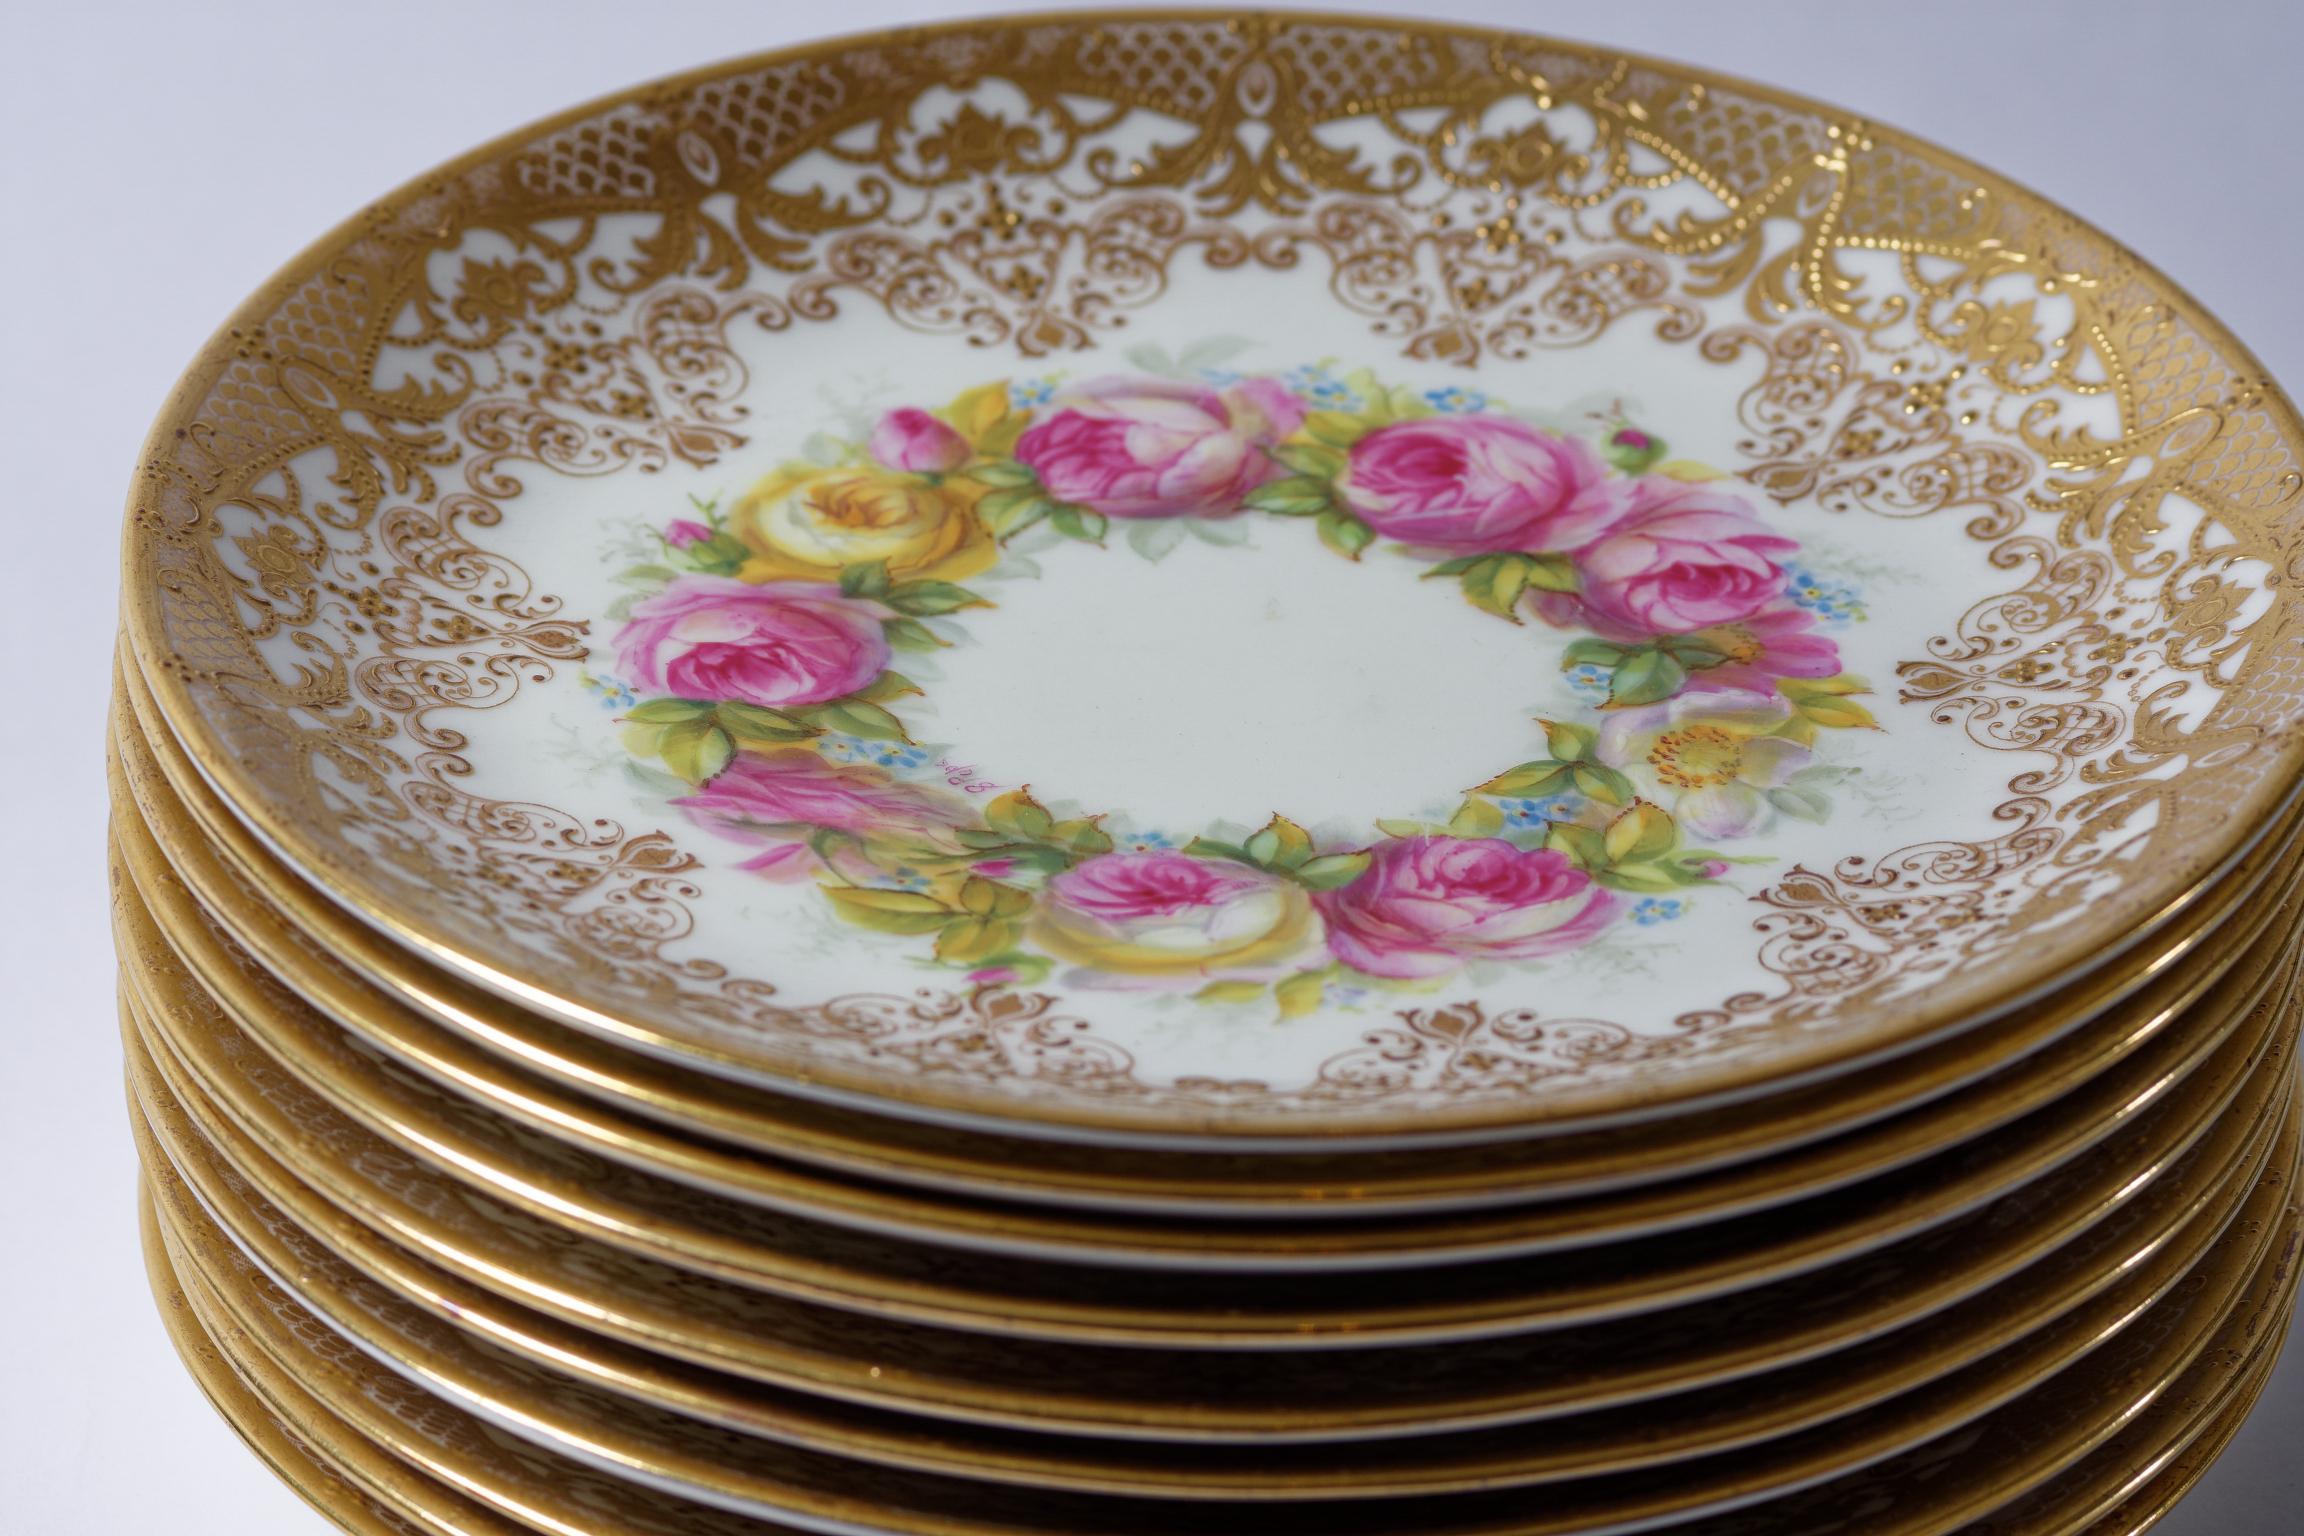 A very pretty set of 11 plates with hand painted roses and raised tooled gilding. They were made by the storied Gilded Age firm of Cauldon England and custom ordered through the famed Fifth Ave retailer of Davis Collamore. The artist that created